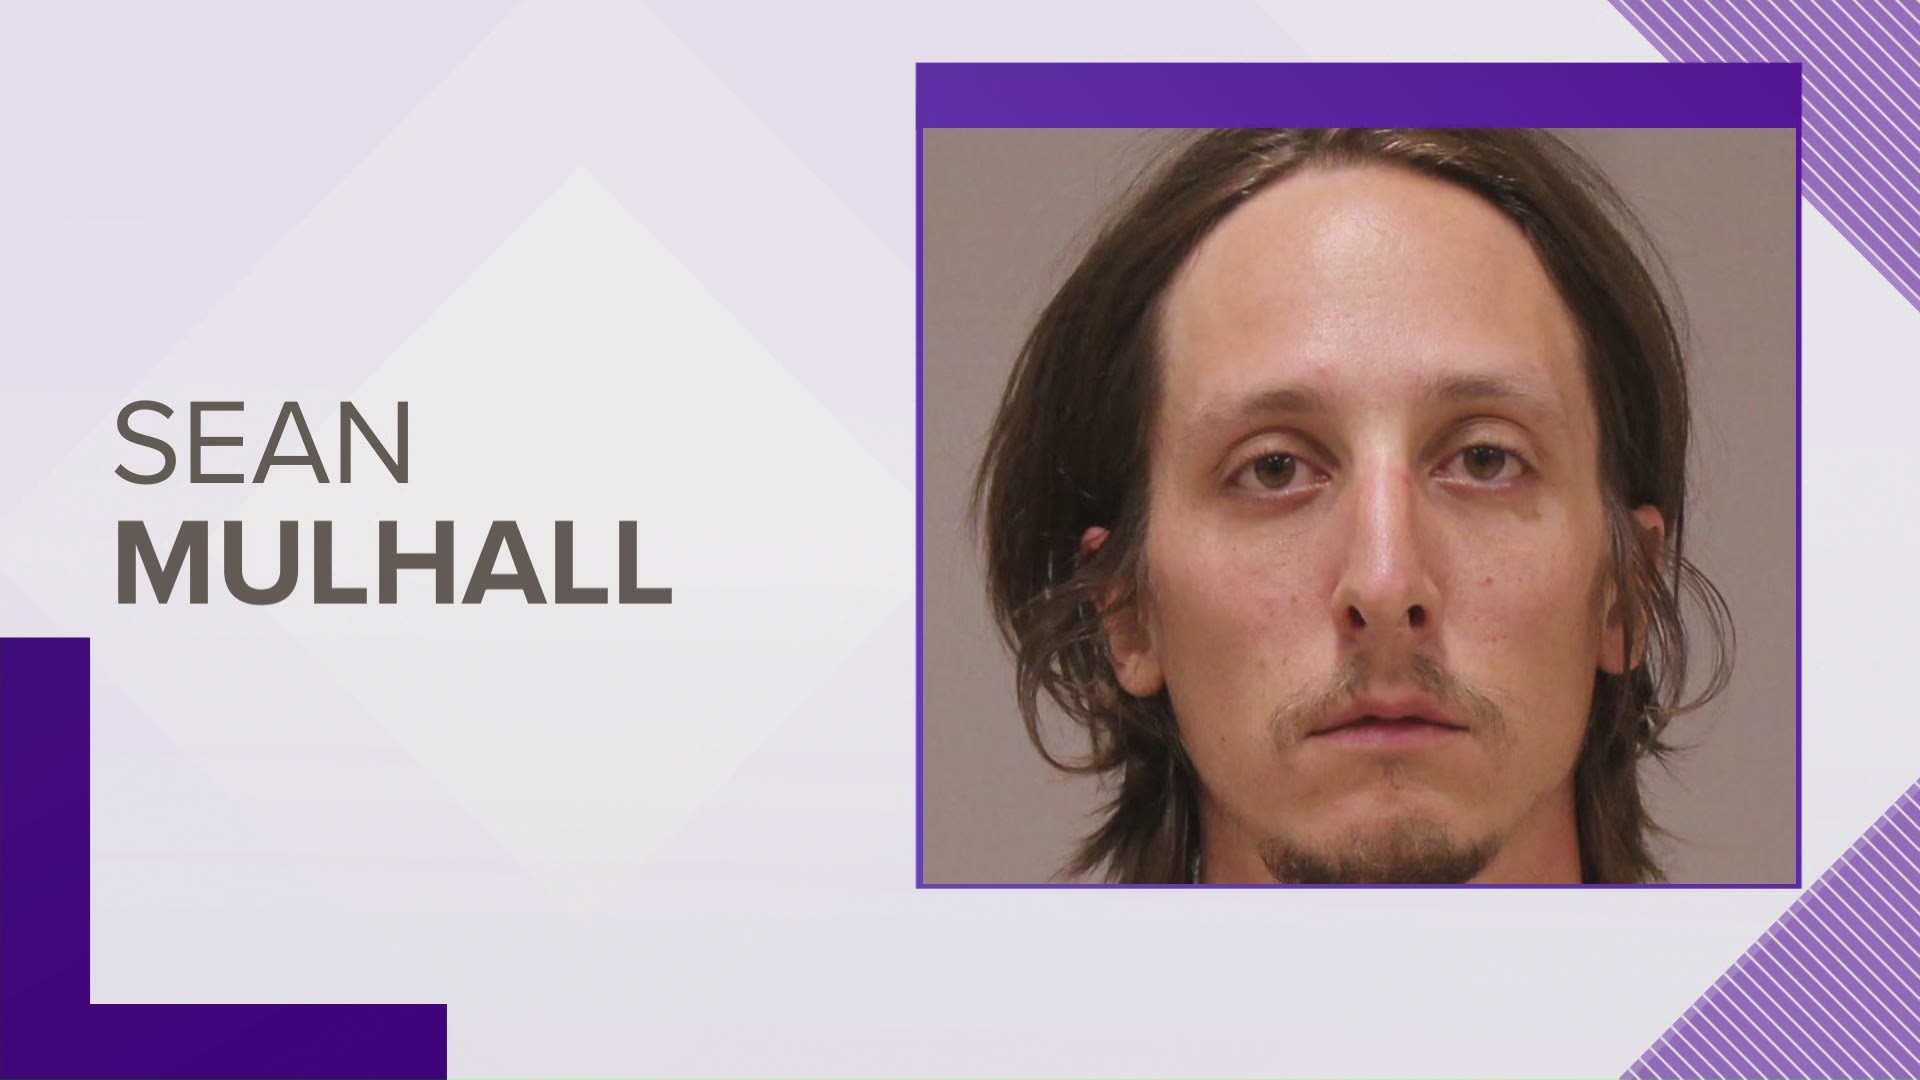 Sean P. Mulhall is one of 17 people, including a teen girl, charged in the late May riot in downtown Grand Rapids that damaged businesses and government buildings.